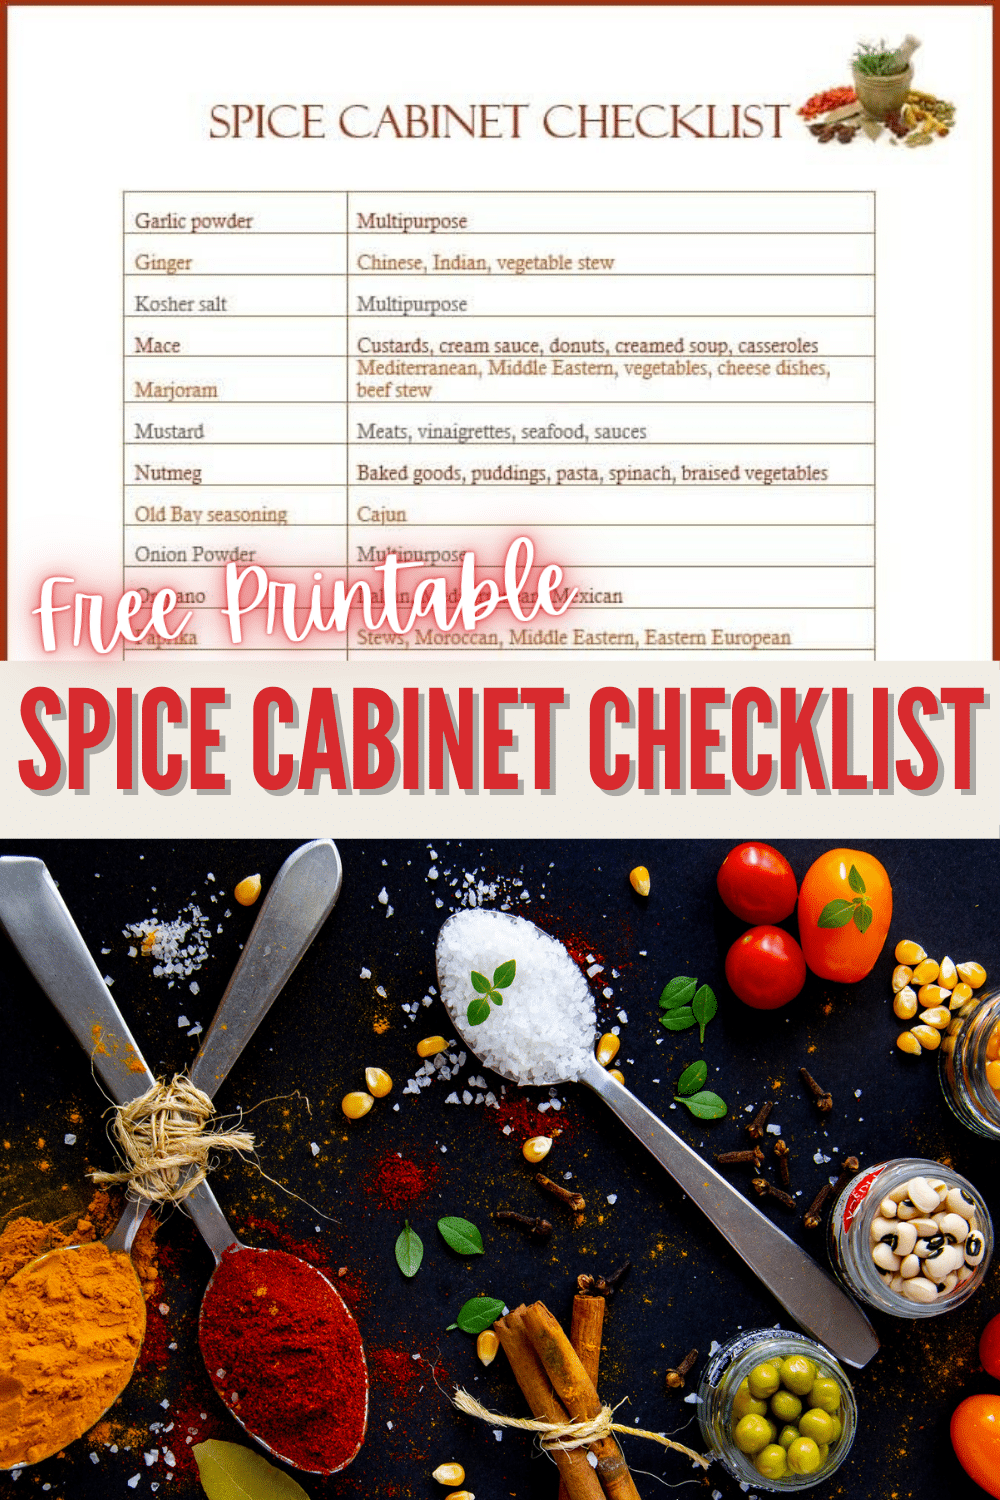 This Spice Cabinet Checklist will help you stock the herbs and spices you need to make most culinary dishes and baked goods. I keep mine taped inside the spice cabinet door so I can tell at a glance if I have all of the spices called for in a new recipe. #spices #checklist #freeprintable via @wondermomwannab